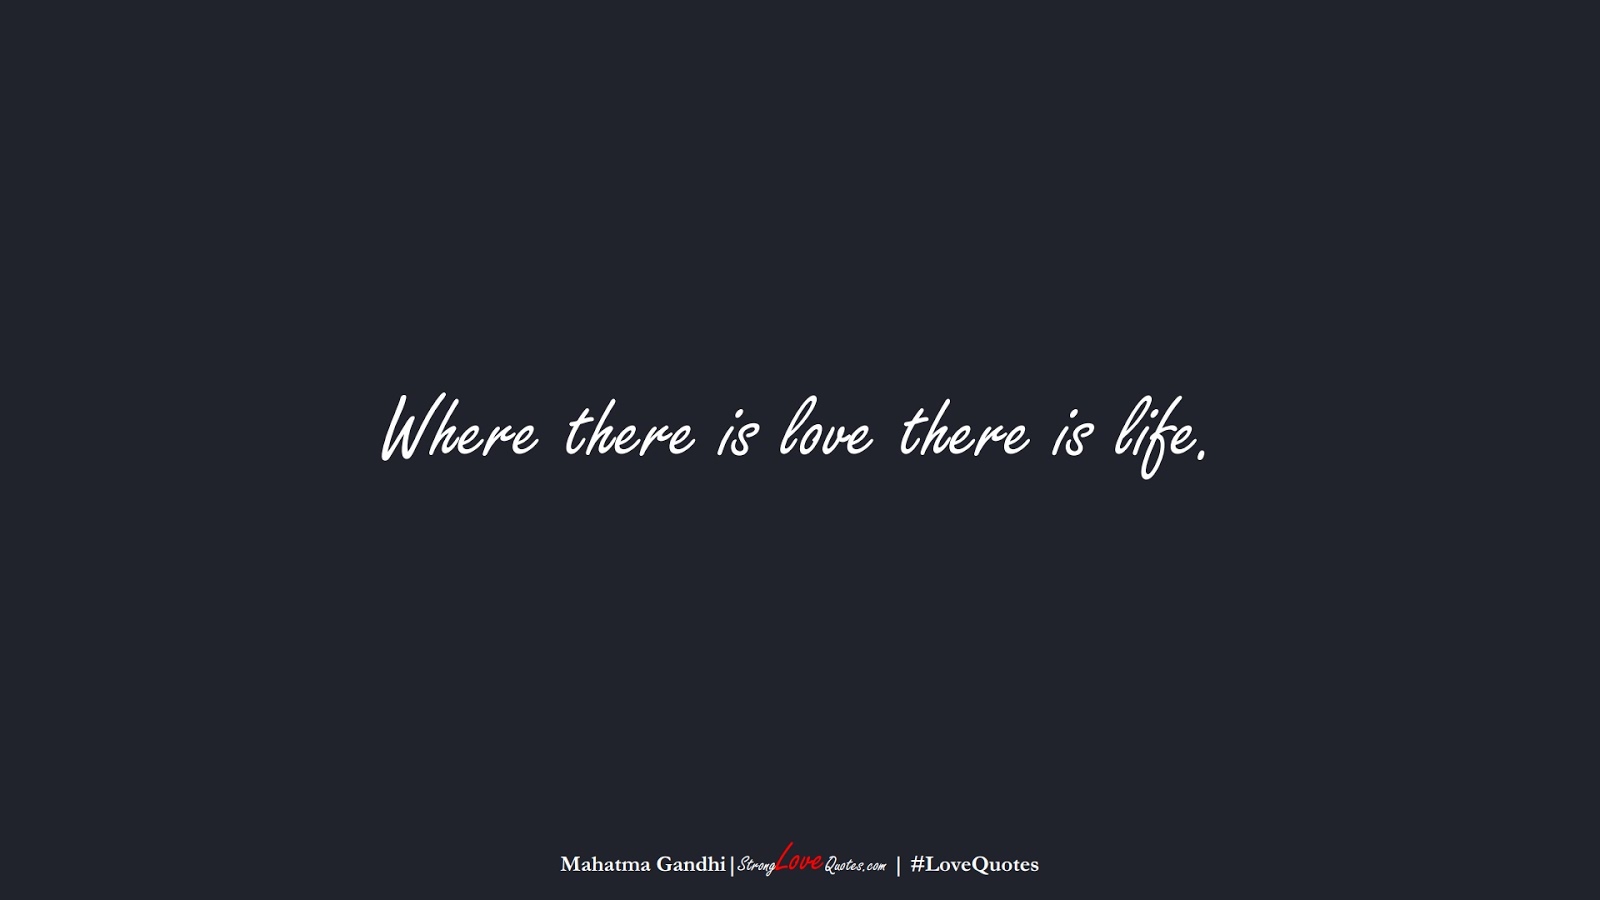 Where there is love there is life. (Mahatma Gandhi);  #LoveQuotes